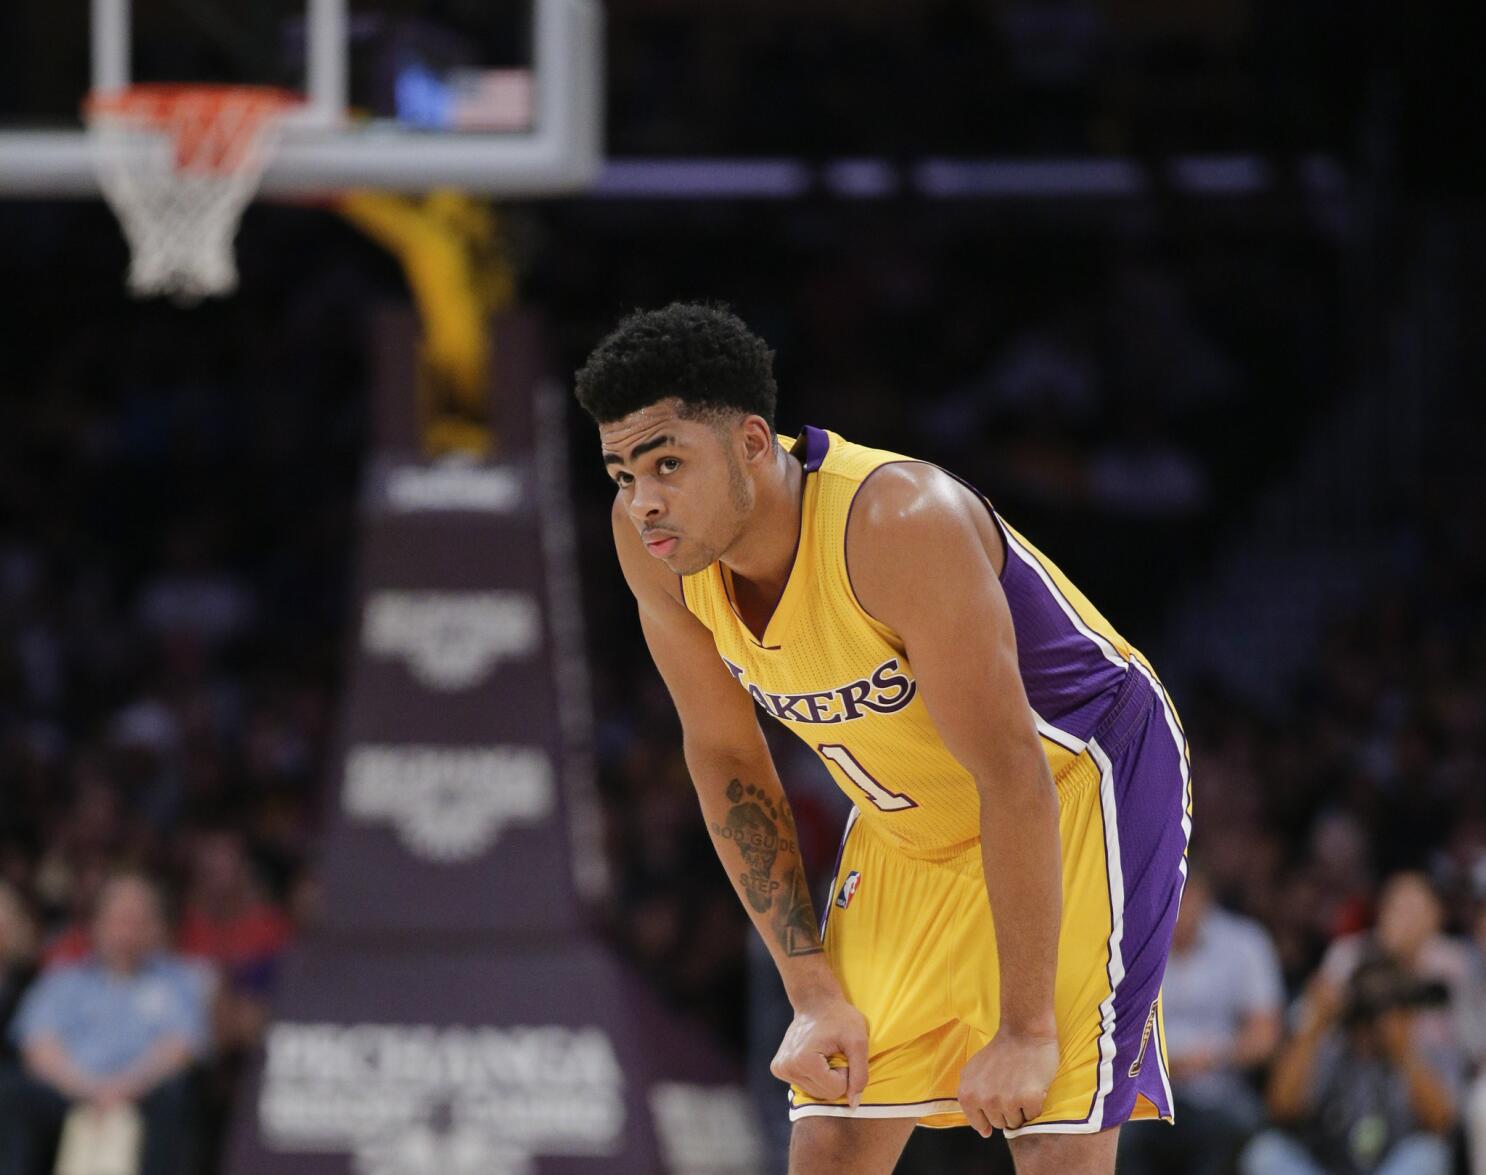 D'Angelo Russell will start for the Lakers in Wednesday night's